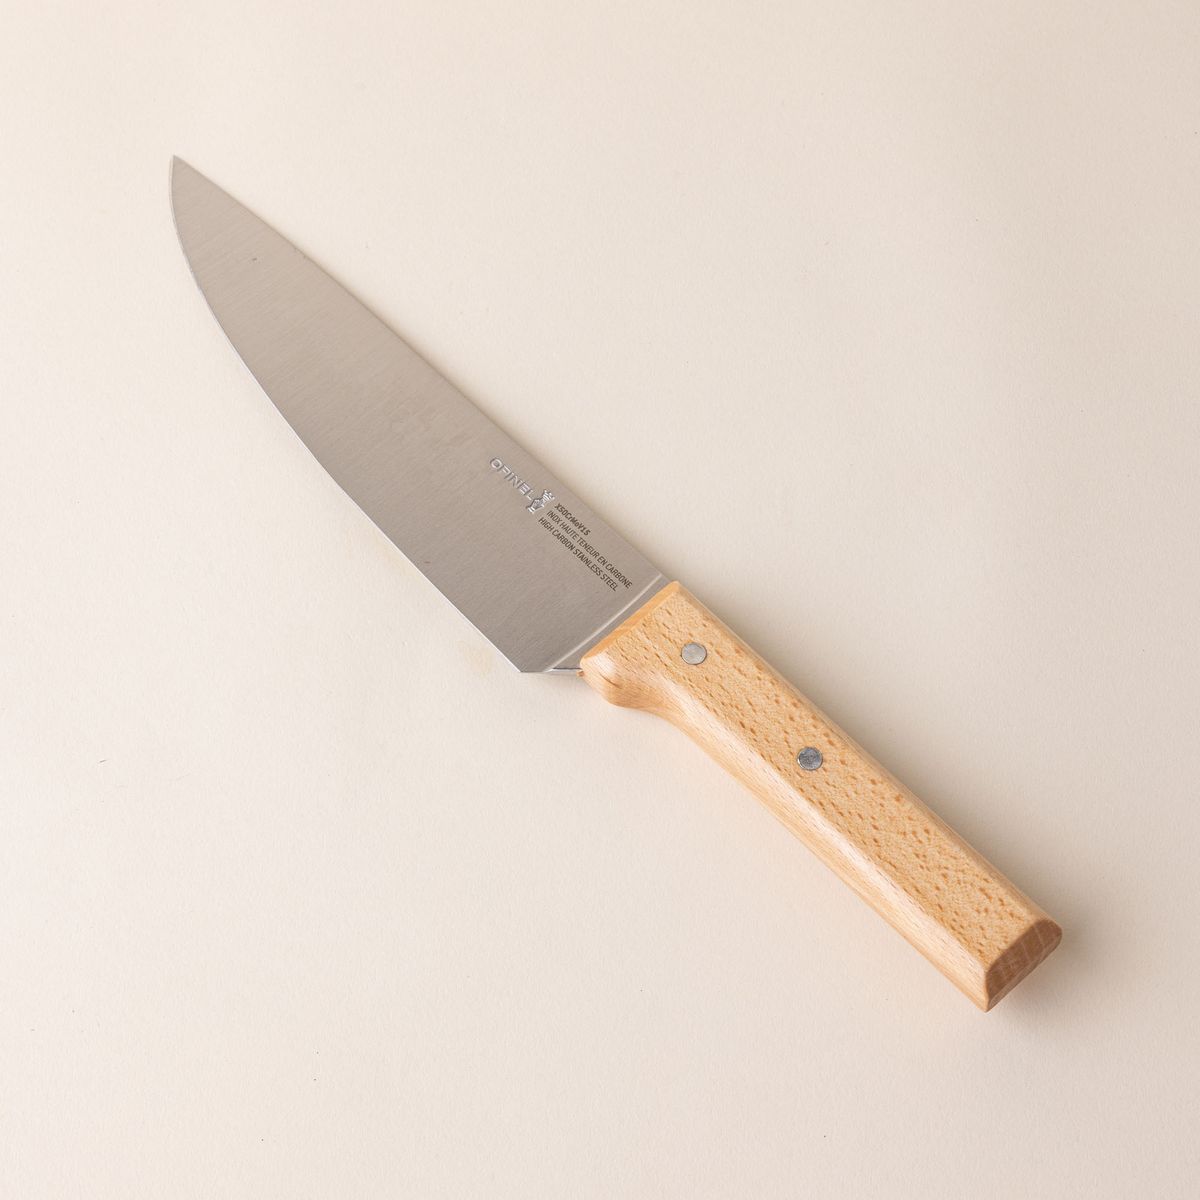 A chef's knife with a steel blade and a light wooden handle